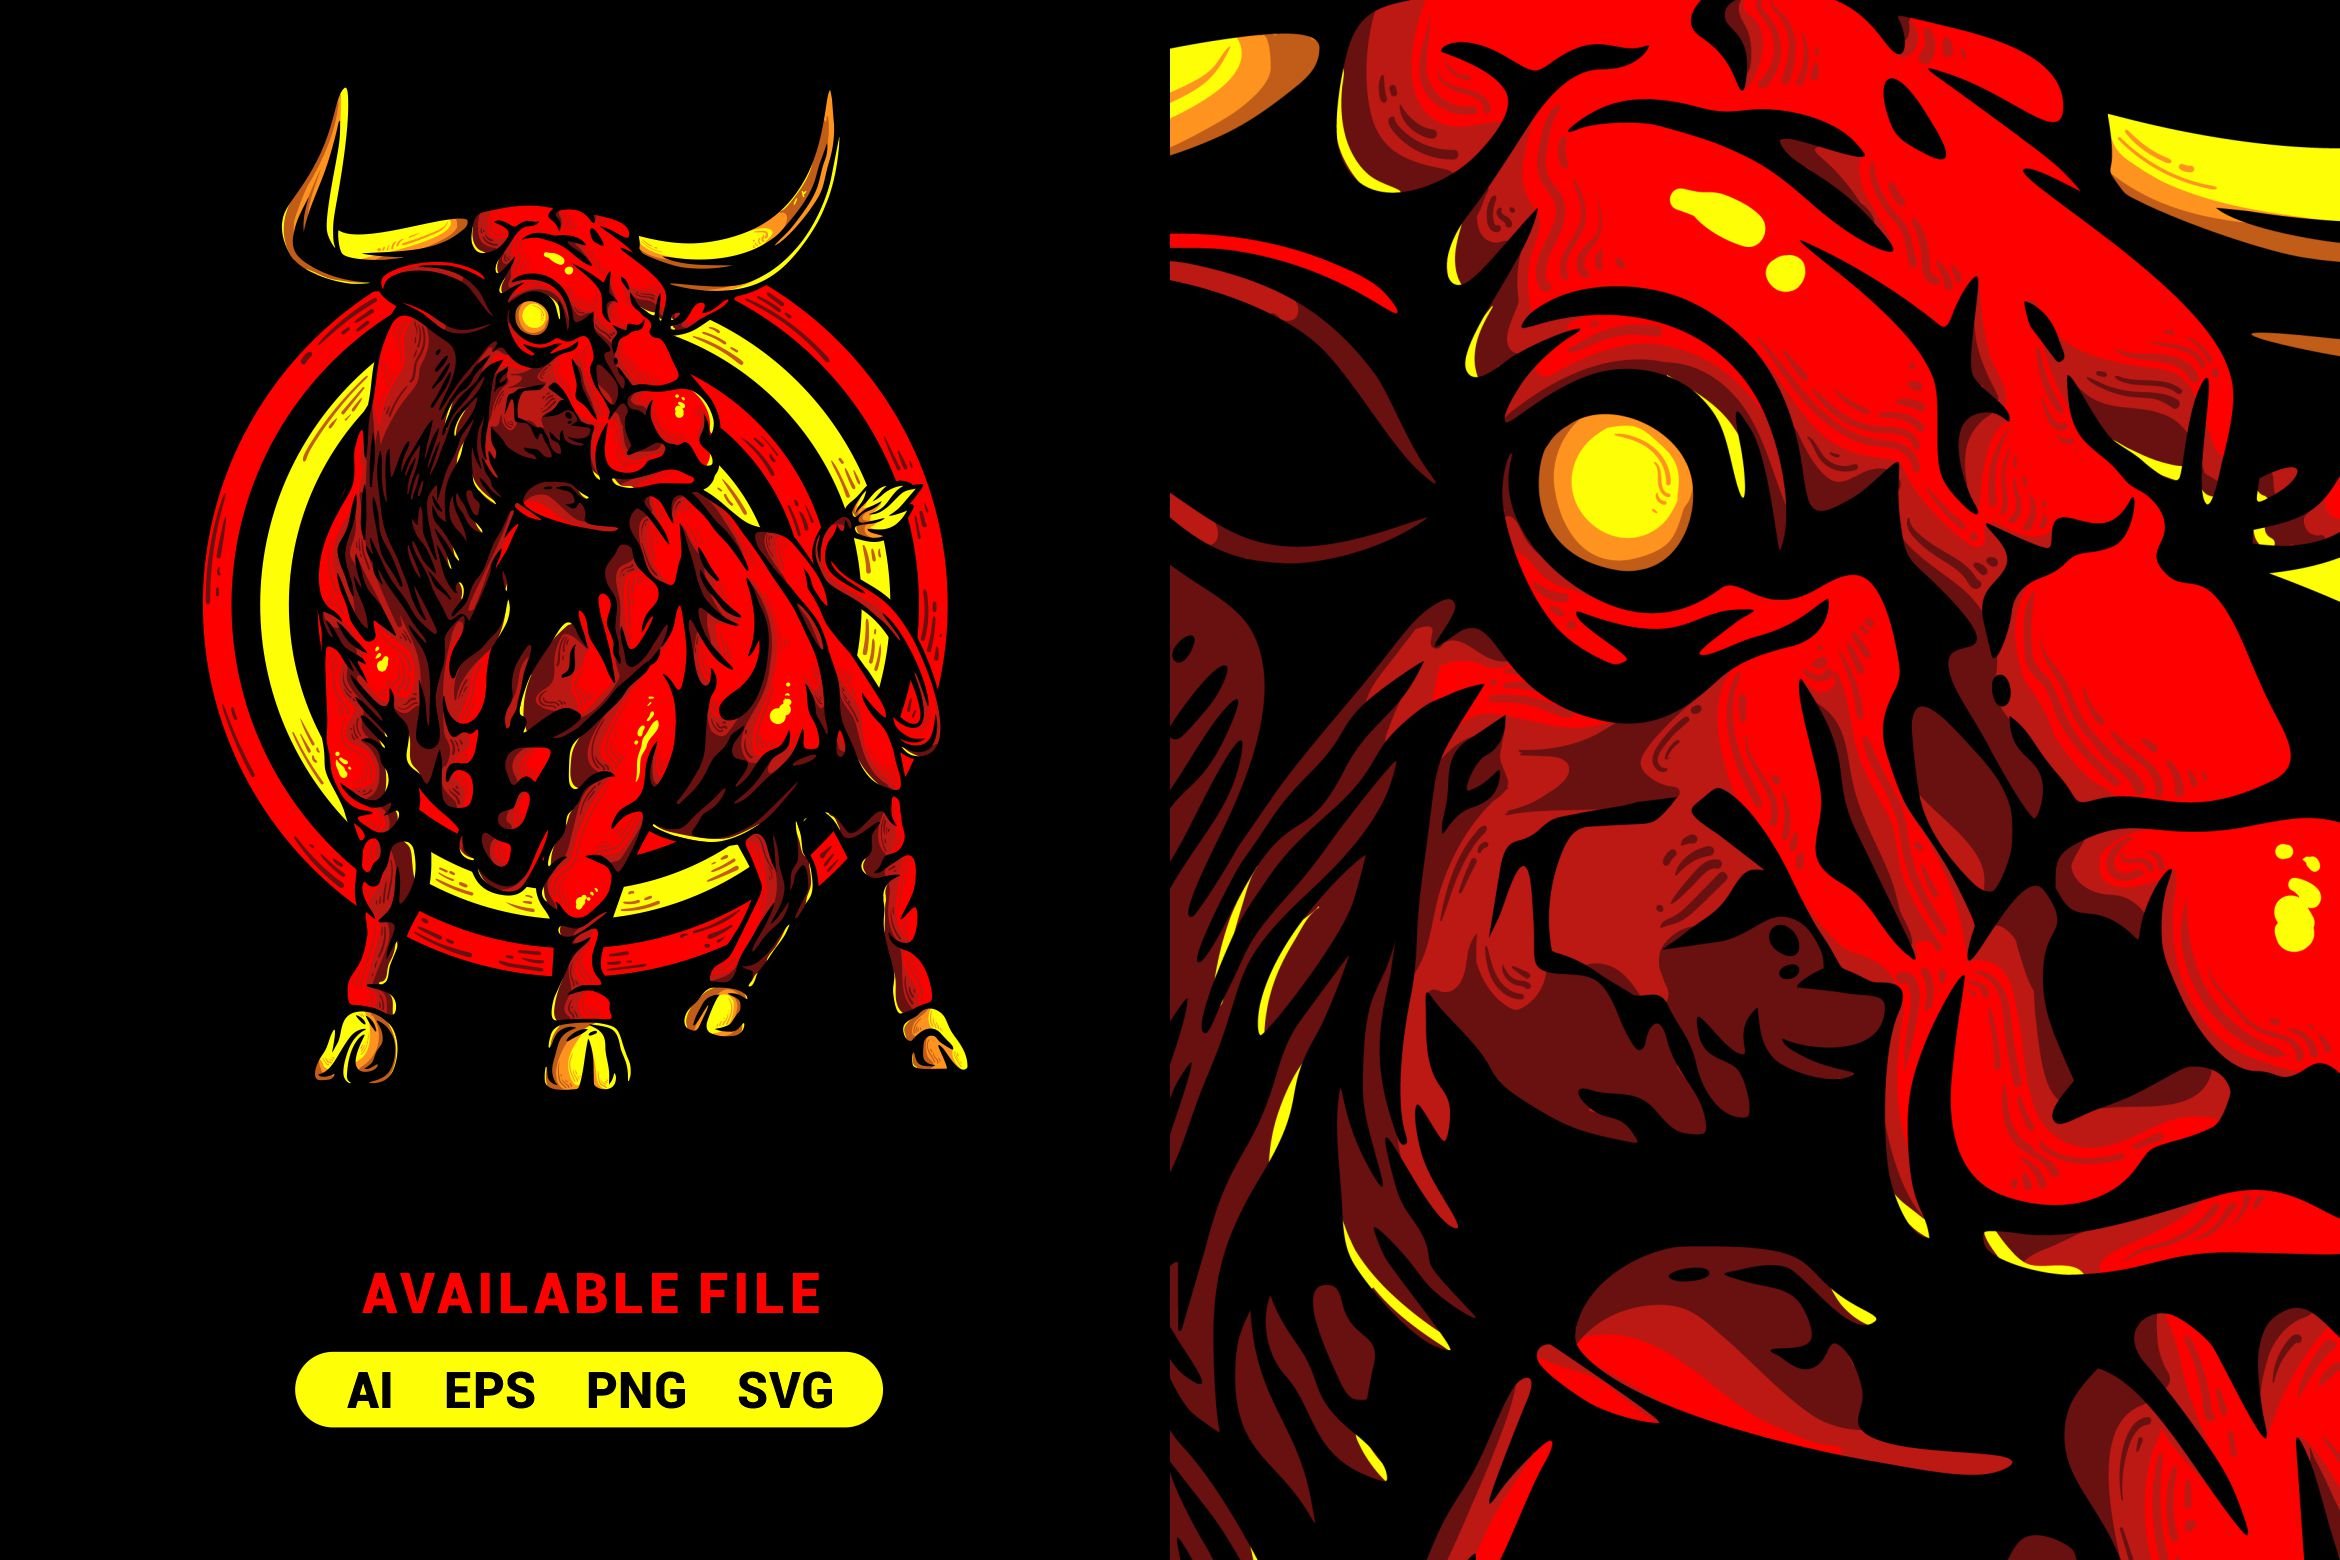 Cool Bull Vector Illustration cover image.